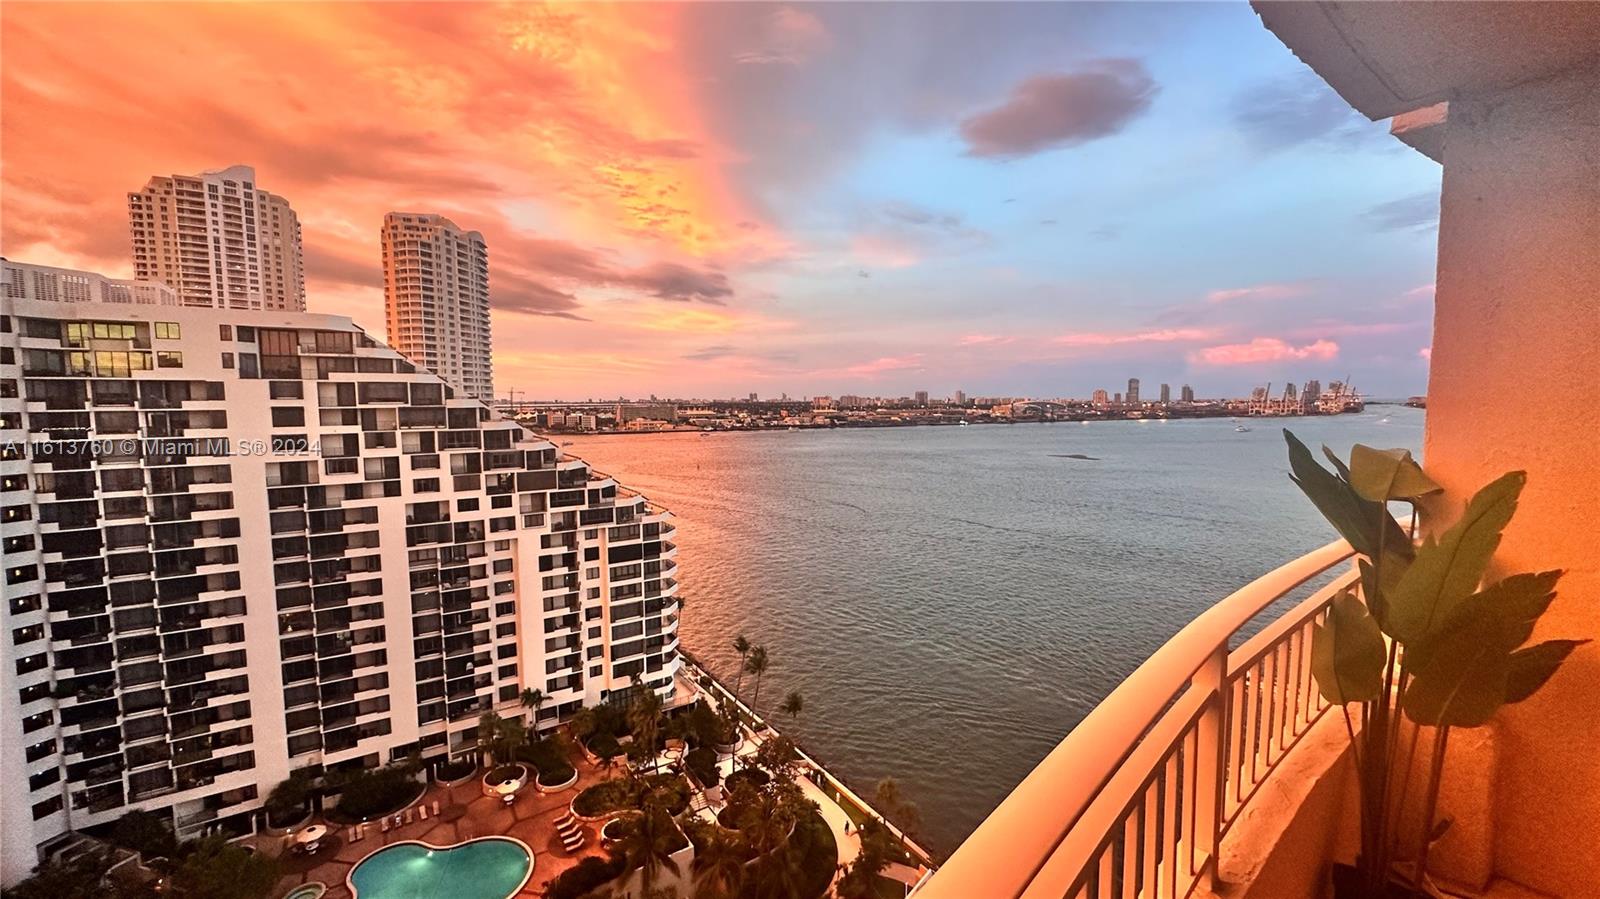 Direct water view in the exclusive and prestigious Brickell Key! Spectacular views of Biscayne Bay and the Key. Washer and dryer in unit. The building offers excellent amenities, including a waterfront gym, business center, 24-hour concierge service and valet parking, a new pool/spa, and additional amenities. Easy to show with 24-hour notice. Please call or text the listing agent to schedule a viewing. Walking distance to Brickell City Center, signature restaurants, the financial district, and close to expressways and South Beach.